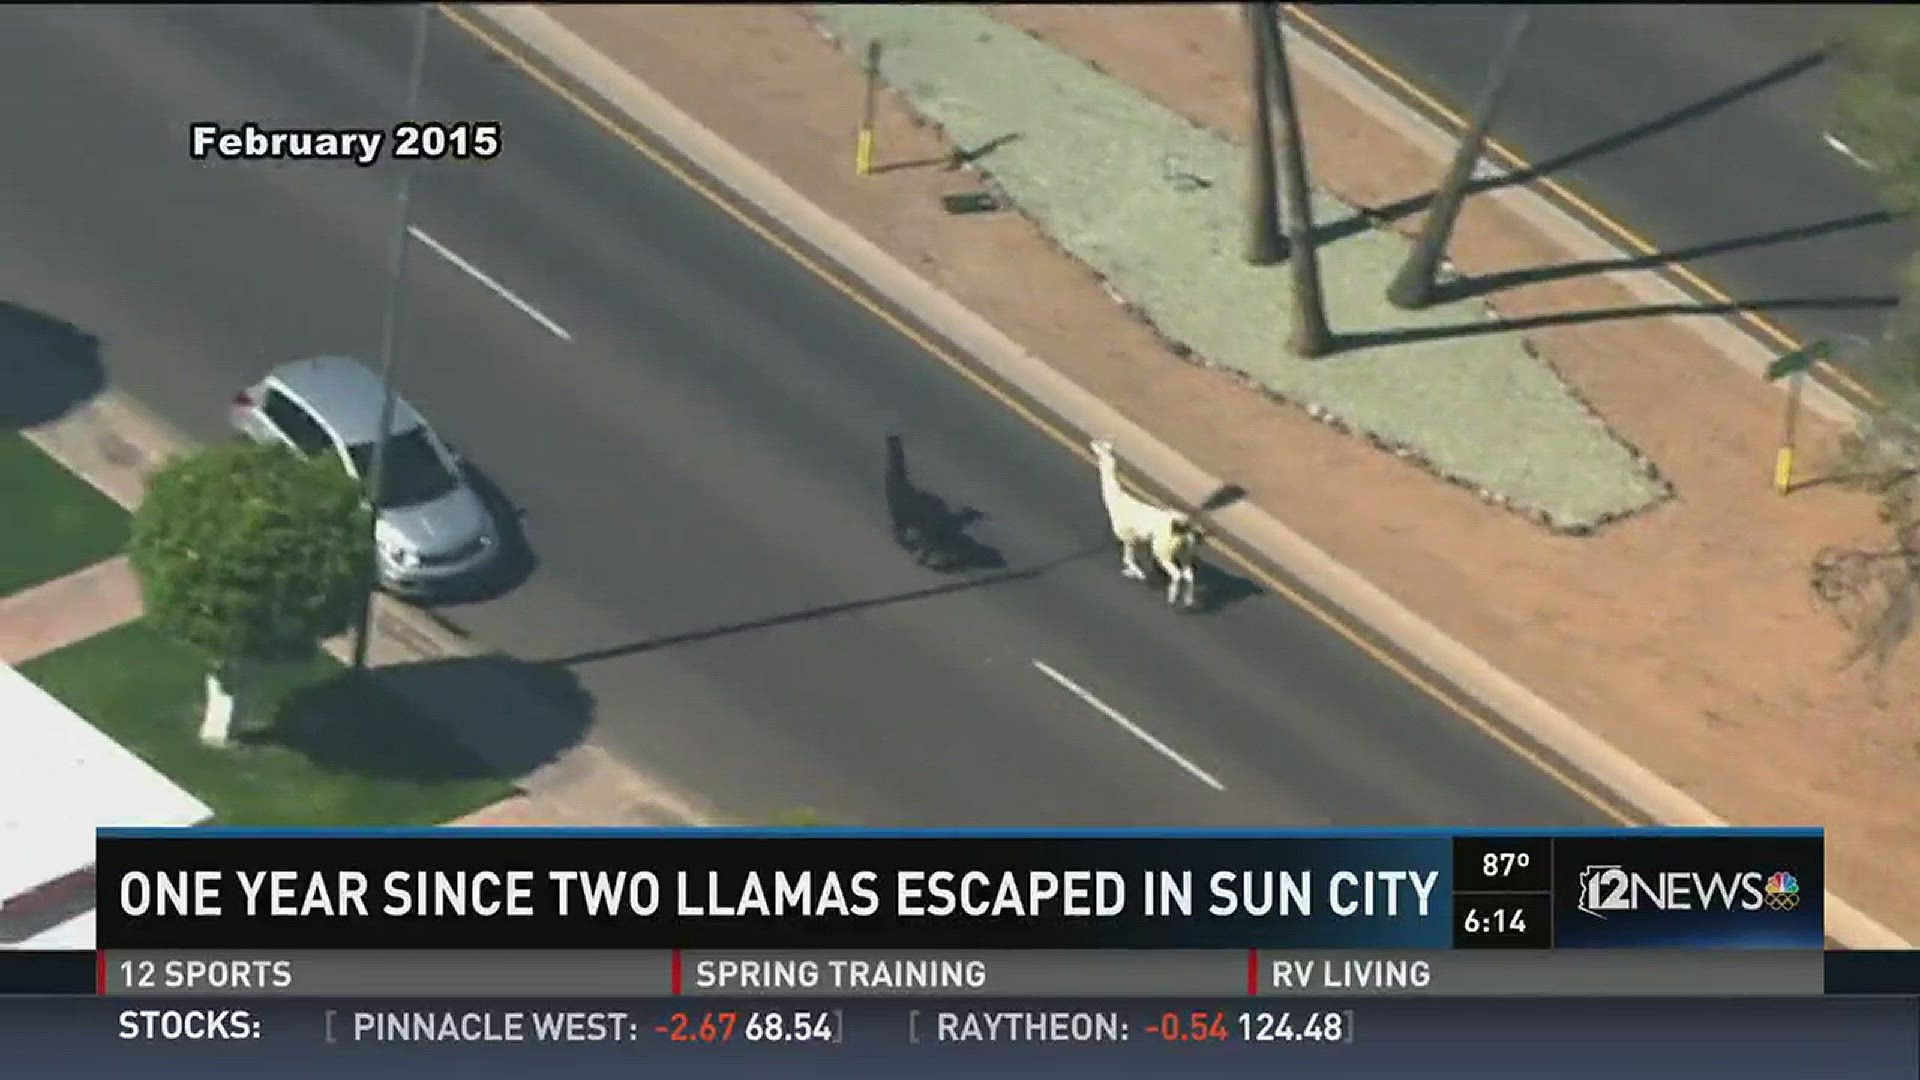 A year after becoming famous, the llamas now live in Chino Valley.